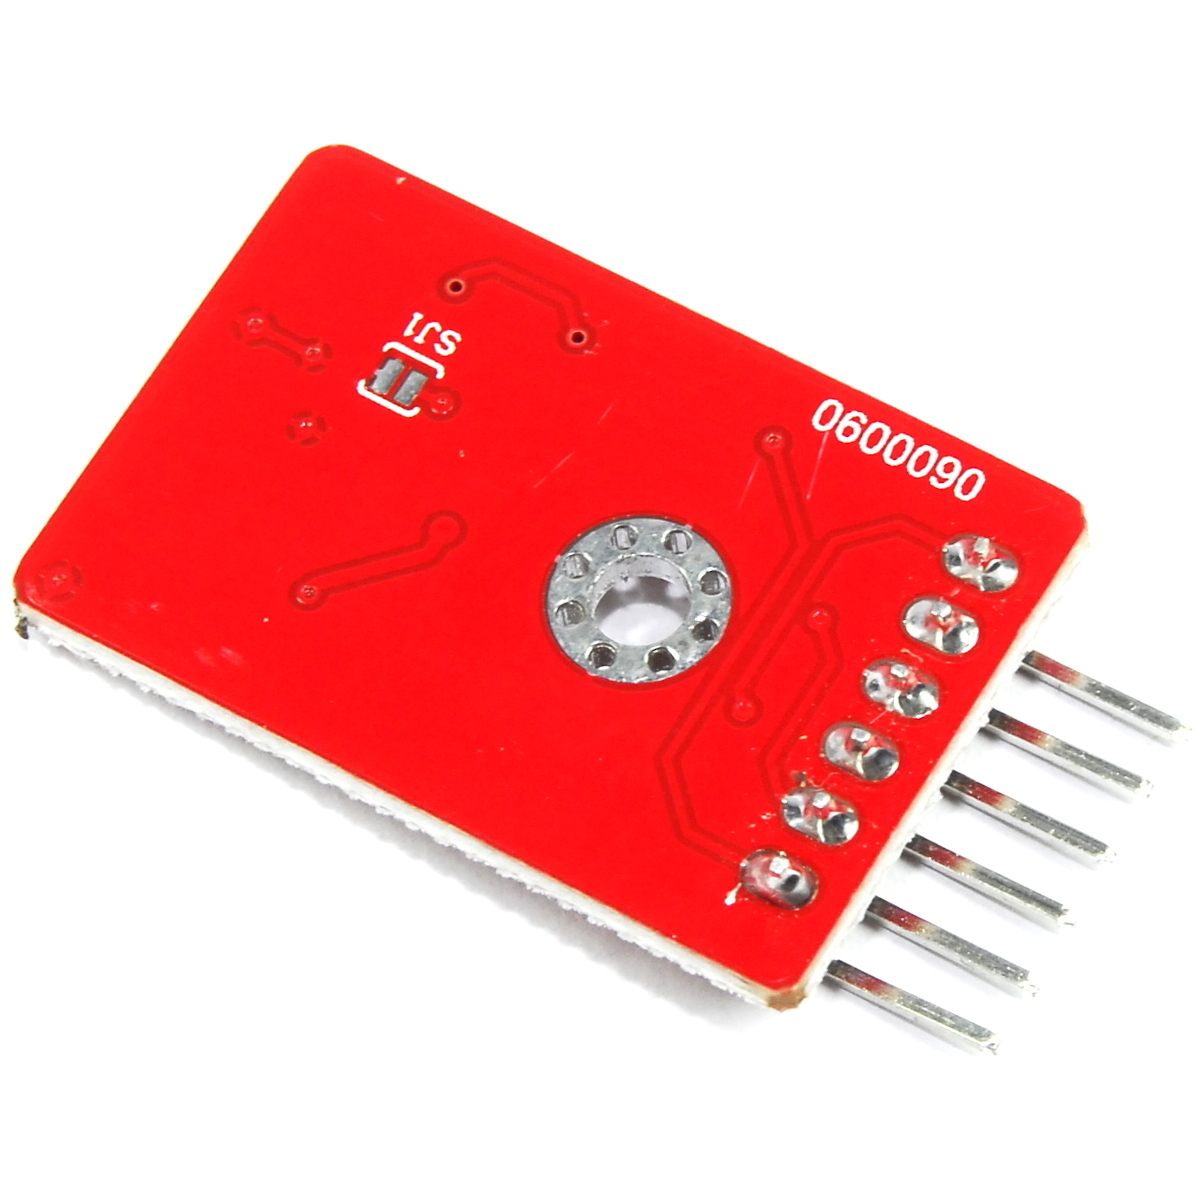 MMA8452Q 3 Axis Acceleration Module Keyes Red Image 2